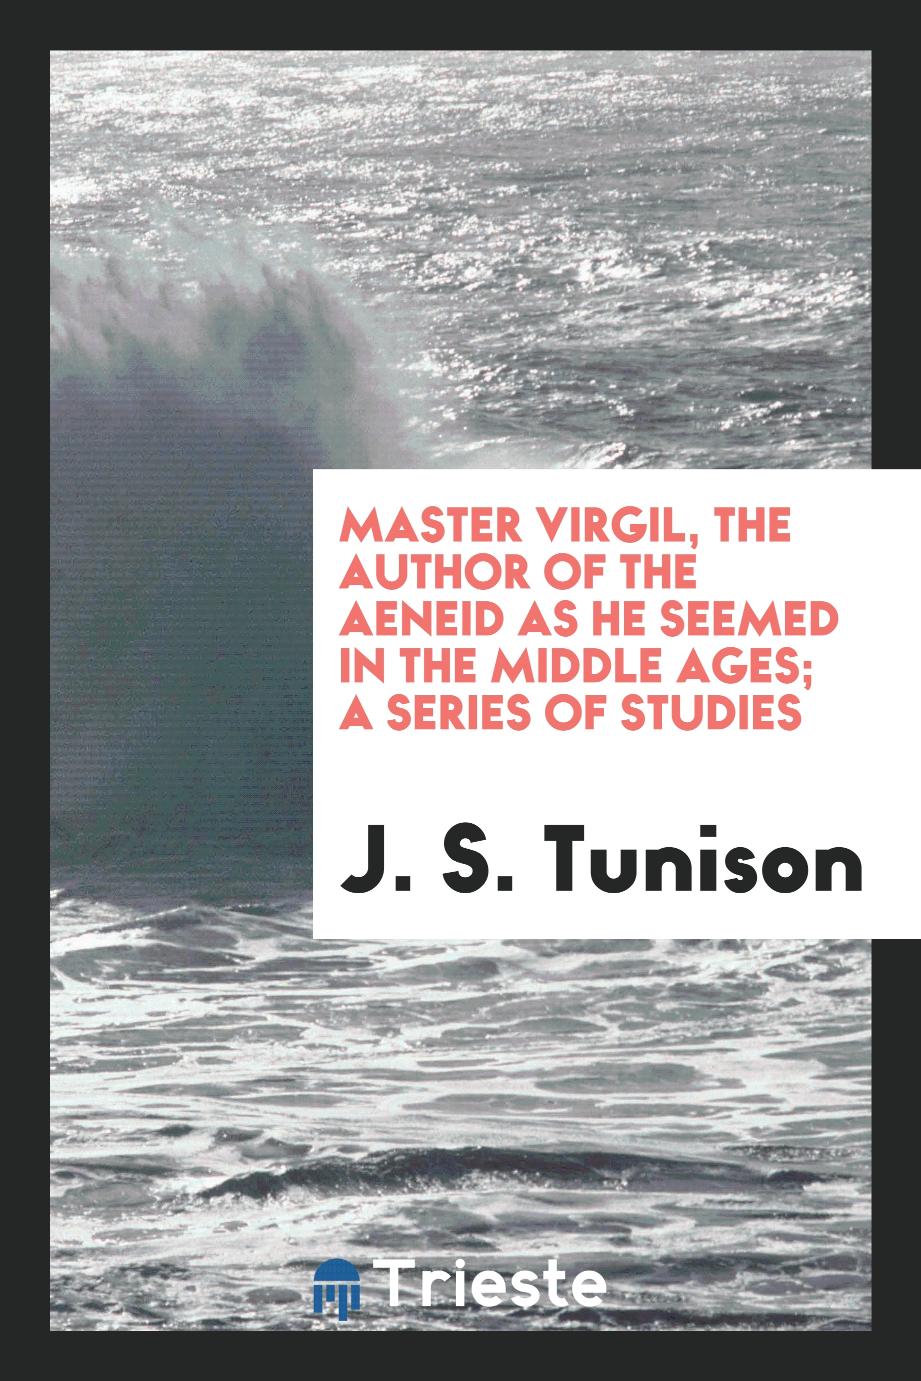 Master Virgil, the author of the Aeneid as he seemed in the Middle Ages; a series of studies